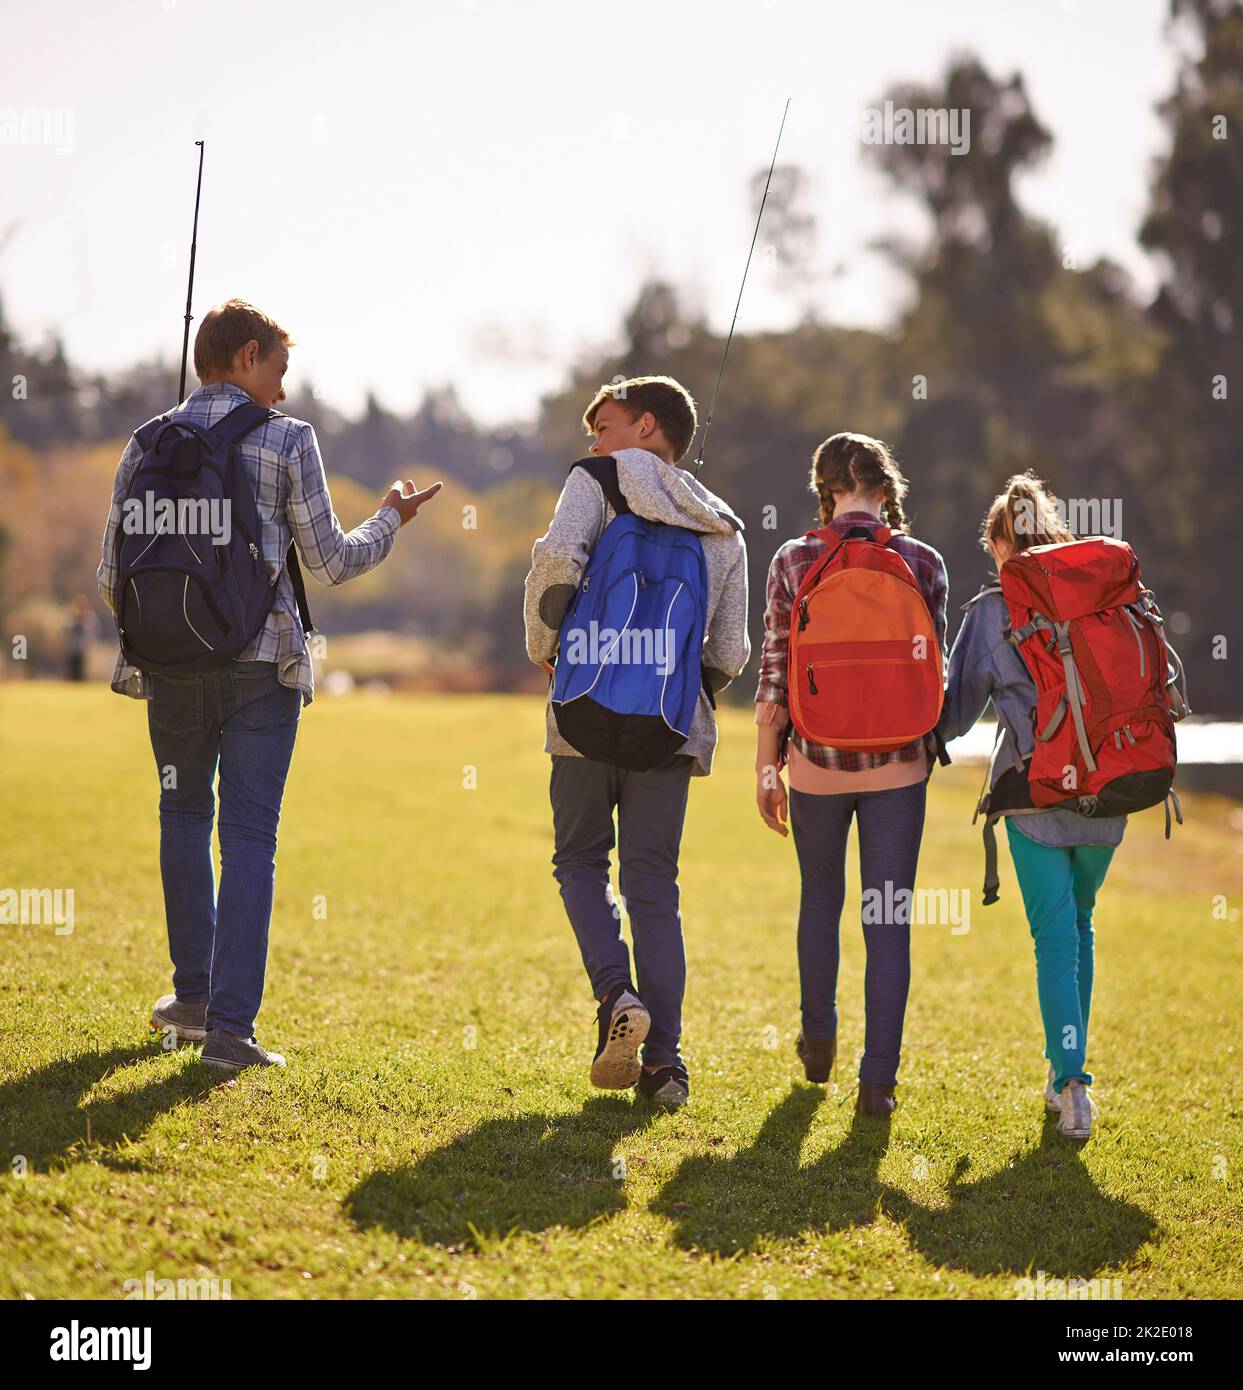 Setting off on an adventure. Shot of a group of children wearing backpacks walking together in nature. Stock Photo